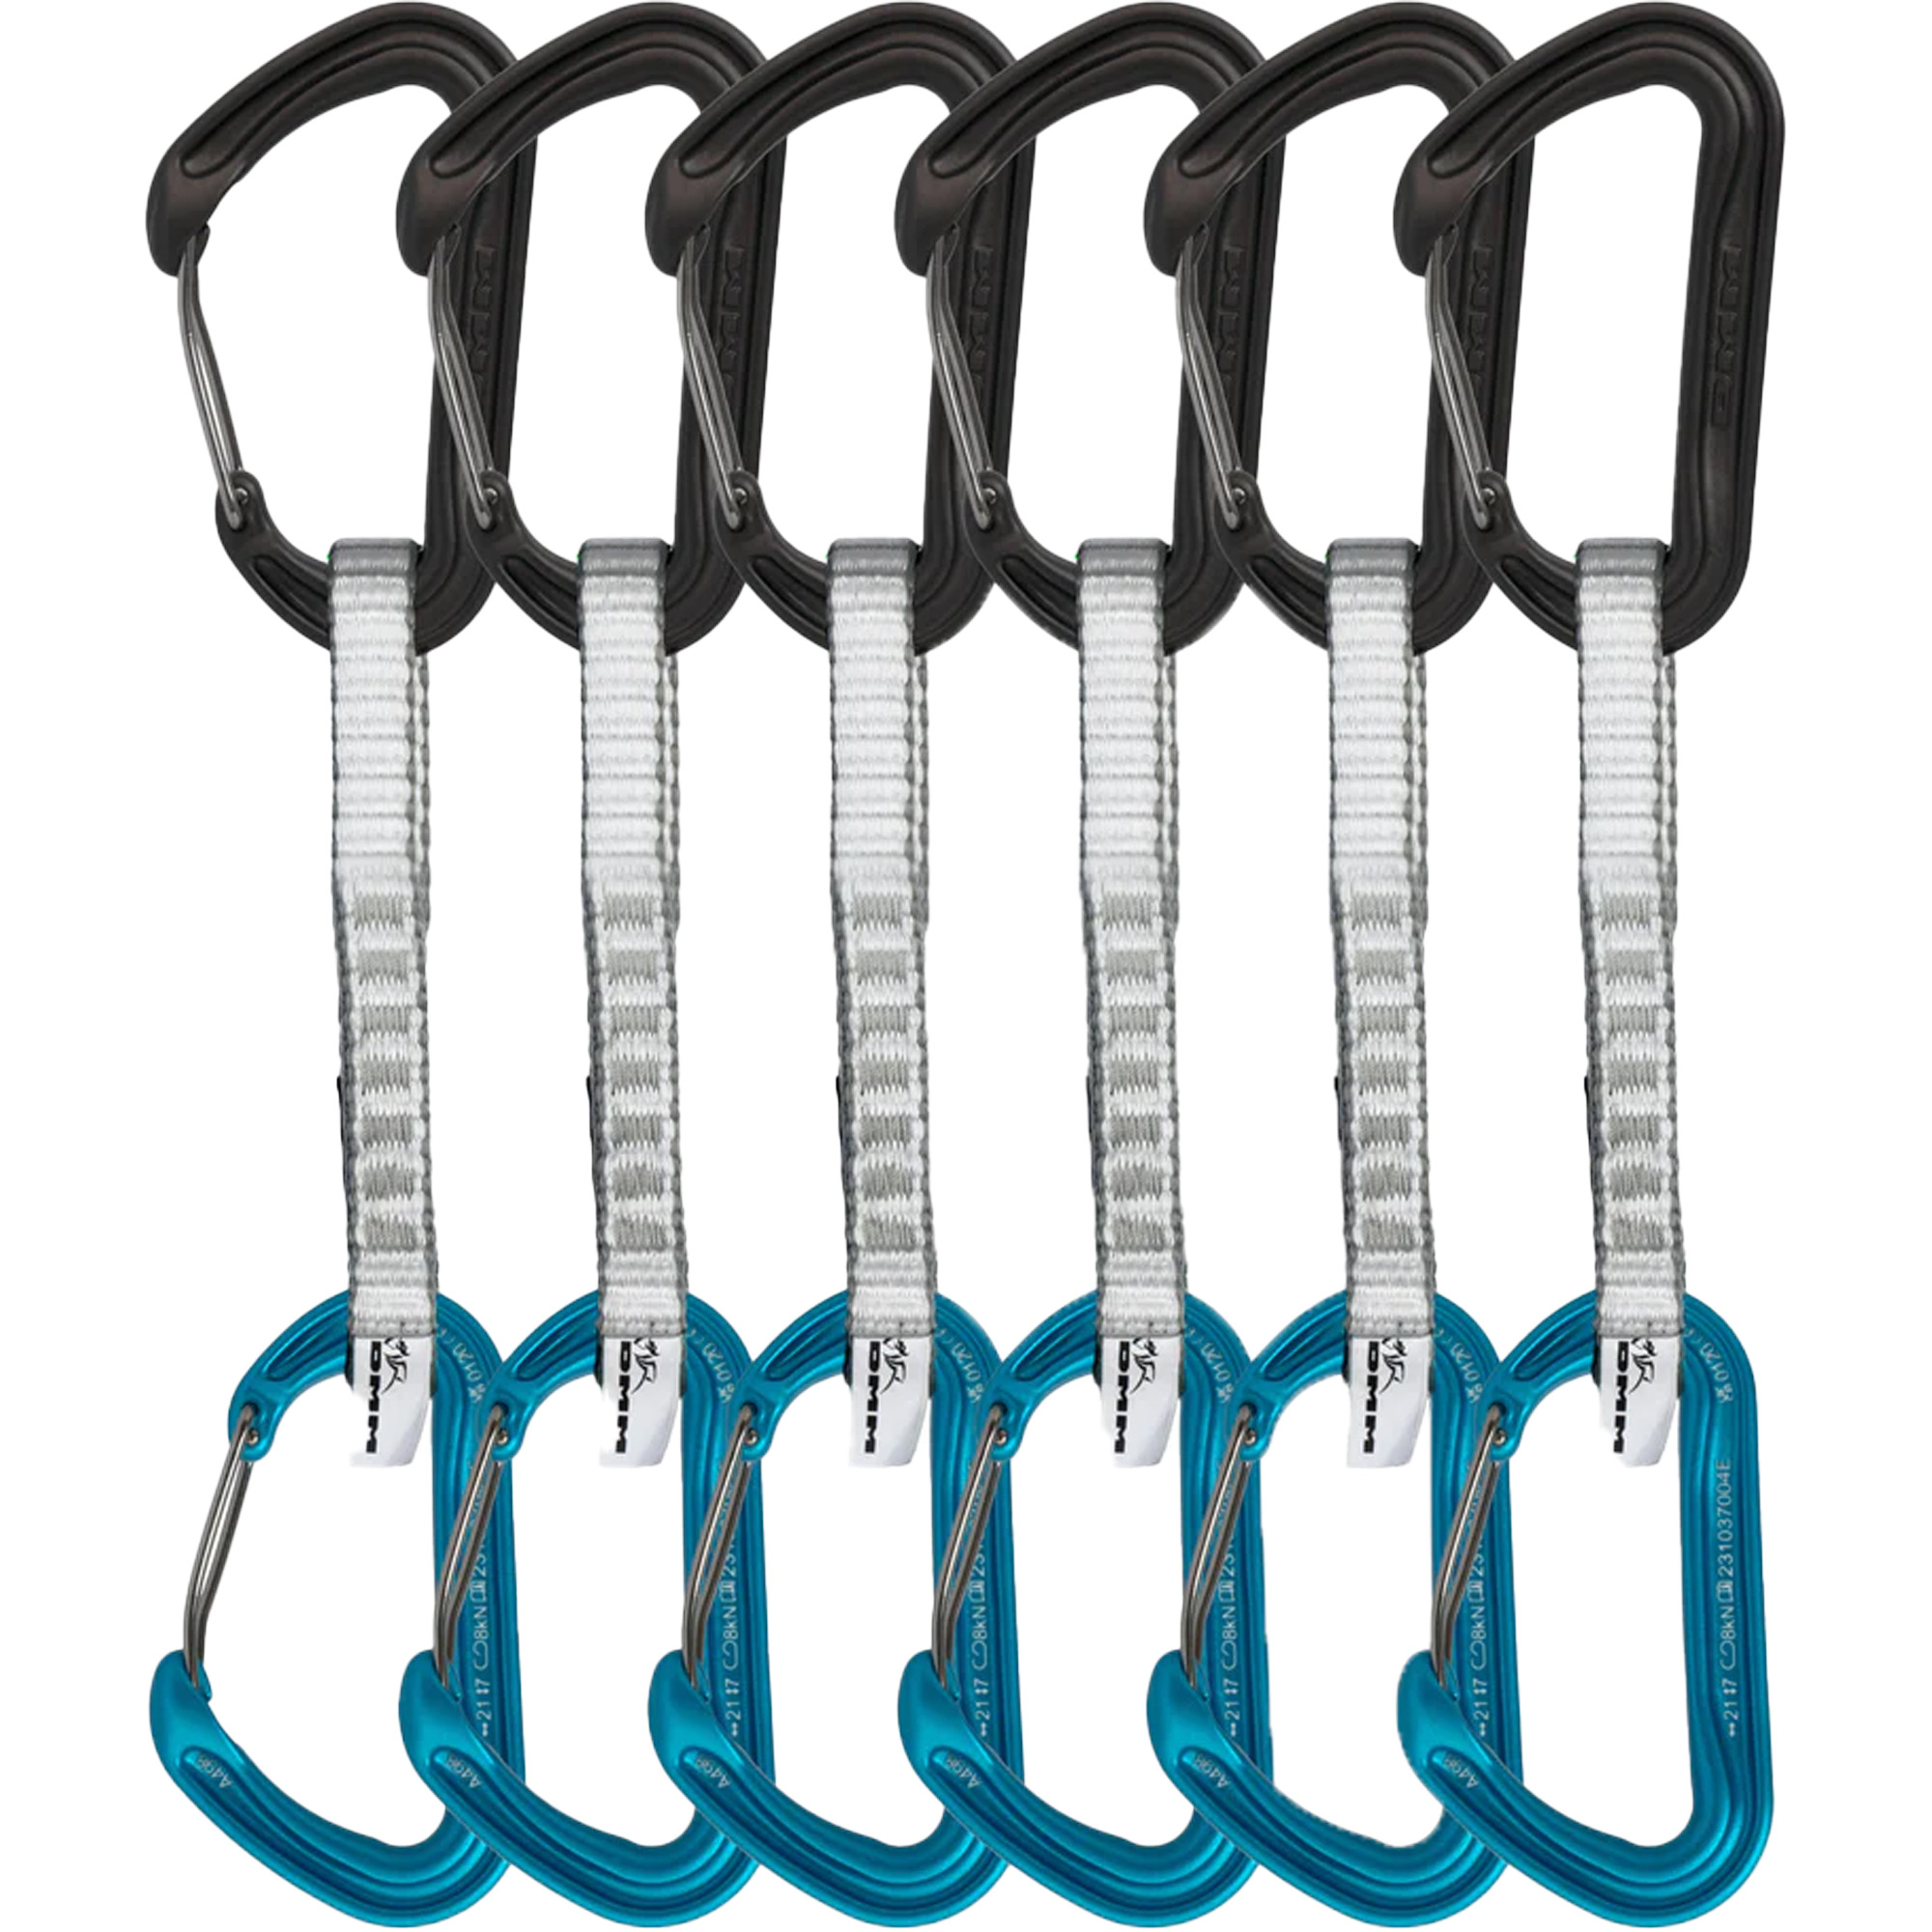 DMM Aether 12cm Rock Climbing Quickdraw 6 Pack